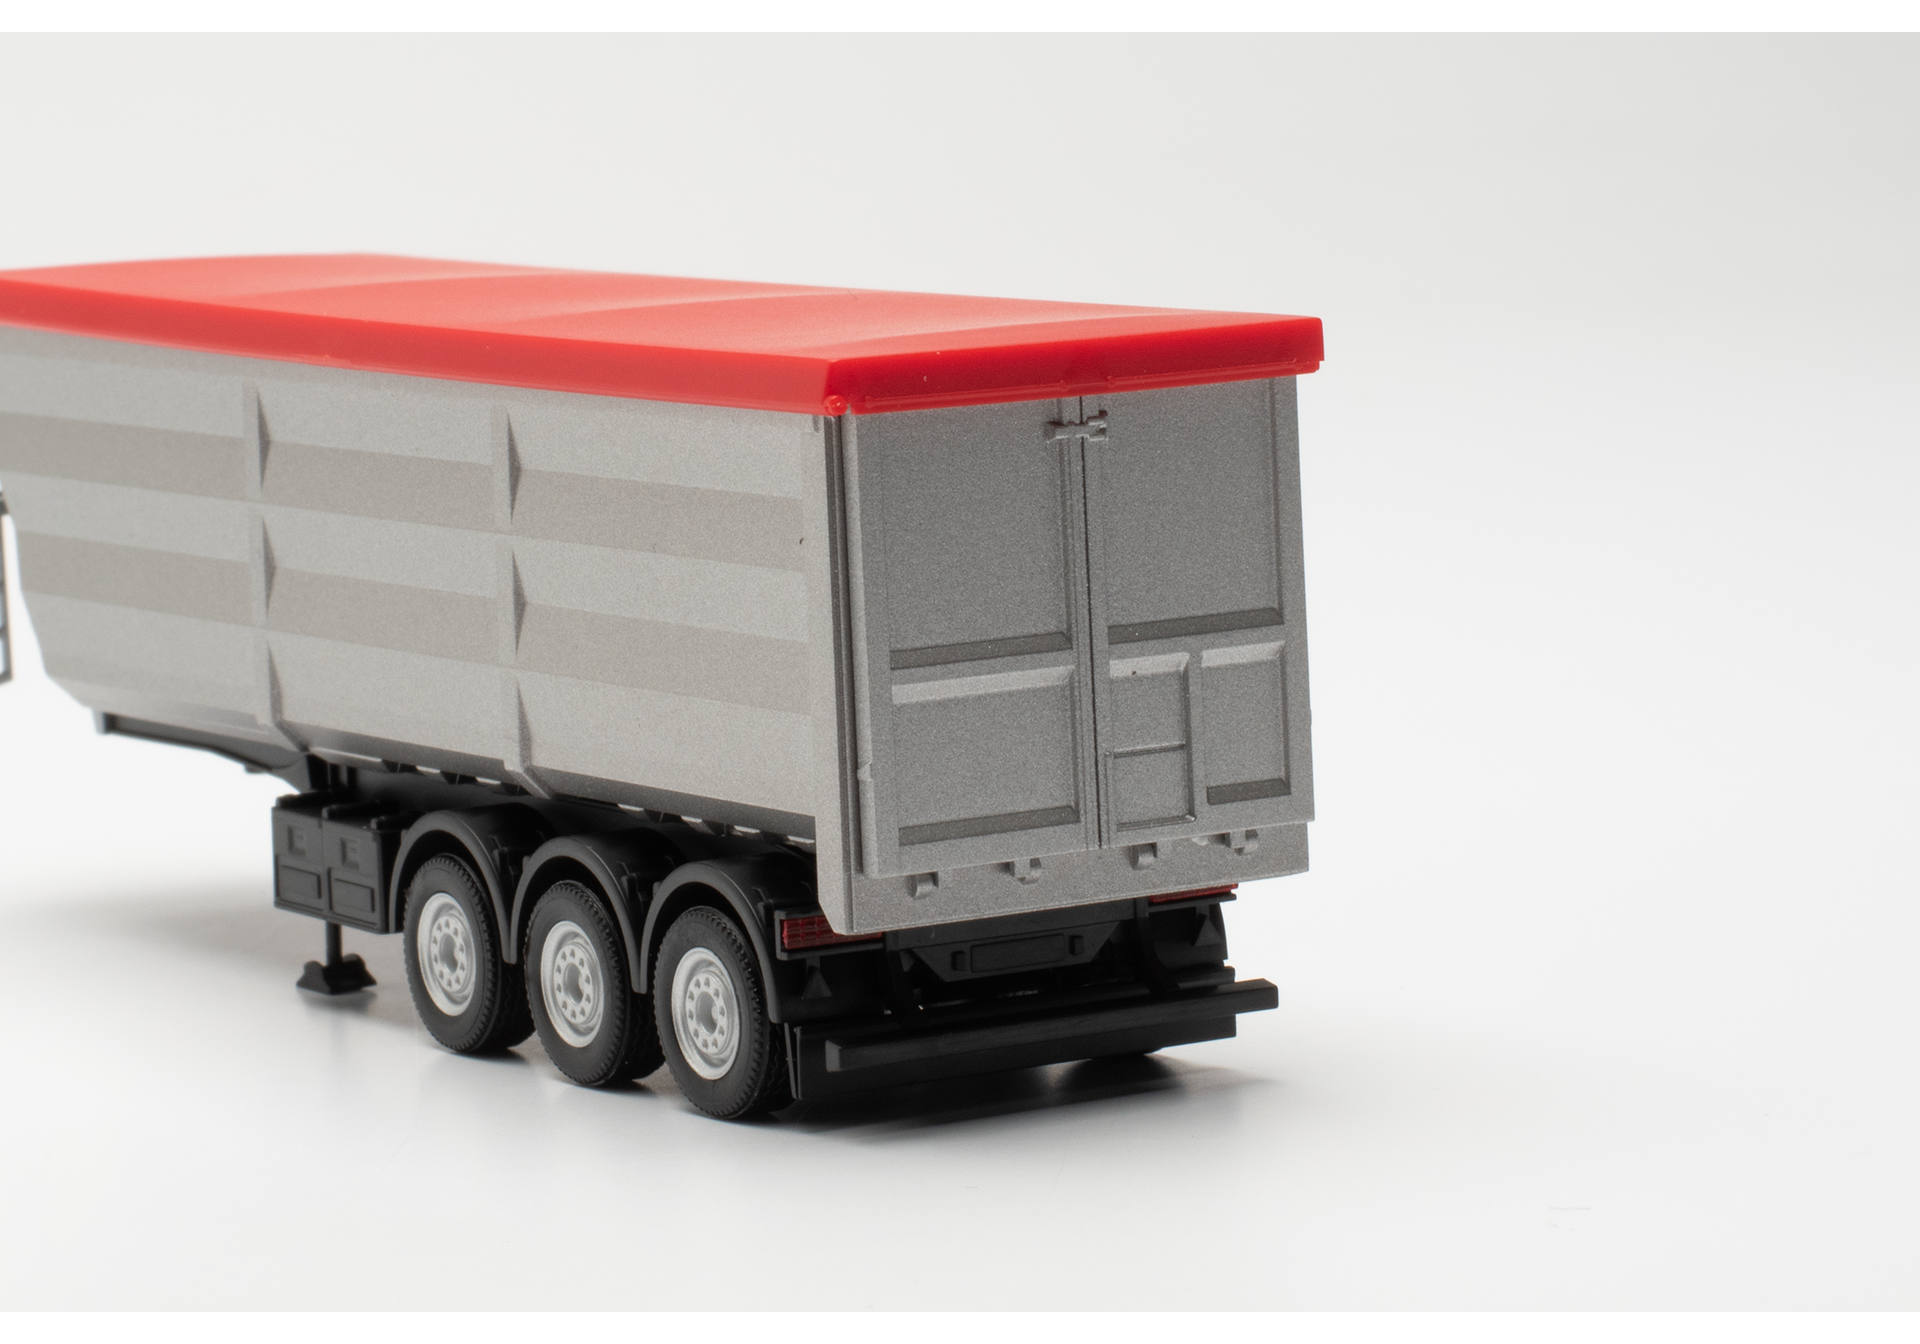 Steel dump trailer, silver with red tarp